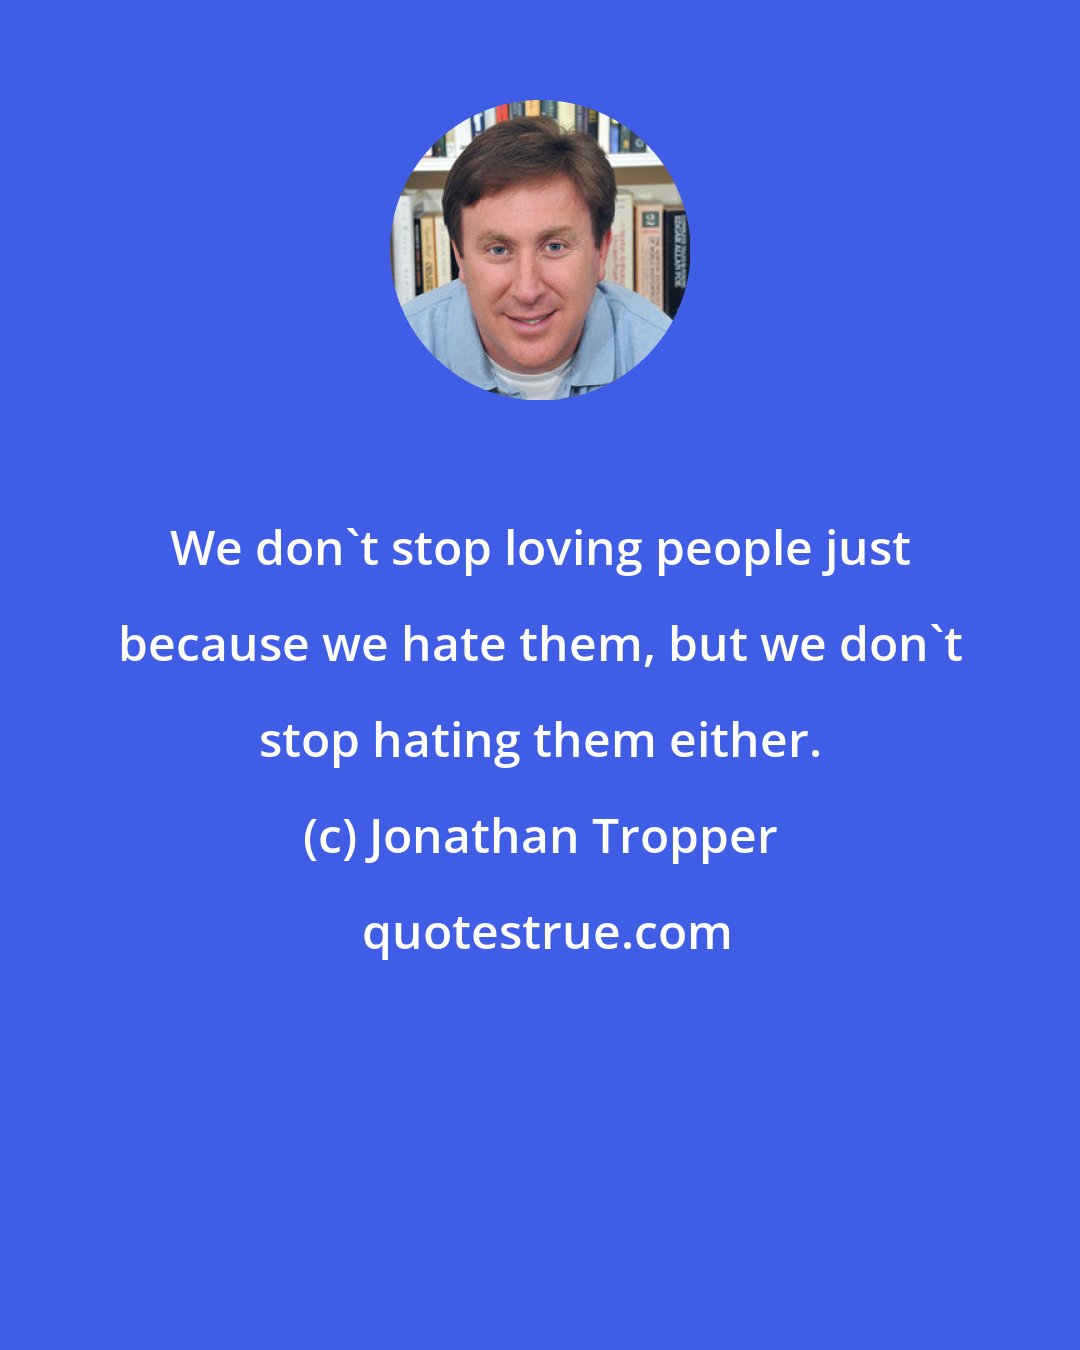 Jonathan Tropper: We don't stop loving people just because we hate them, but we don't stop hating them either.